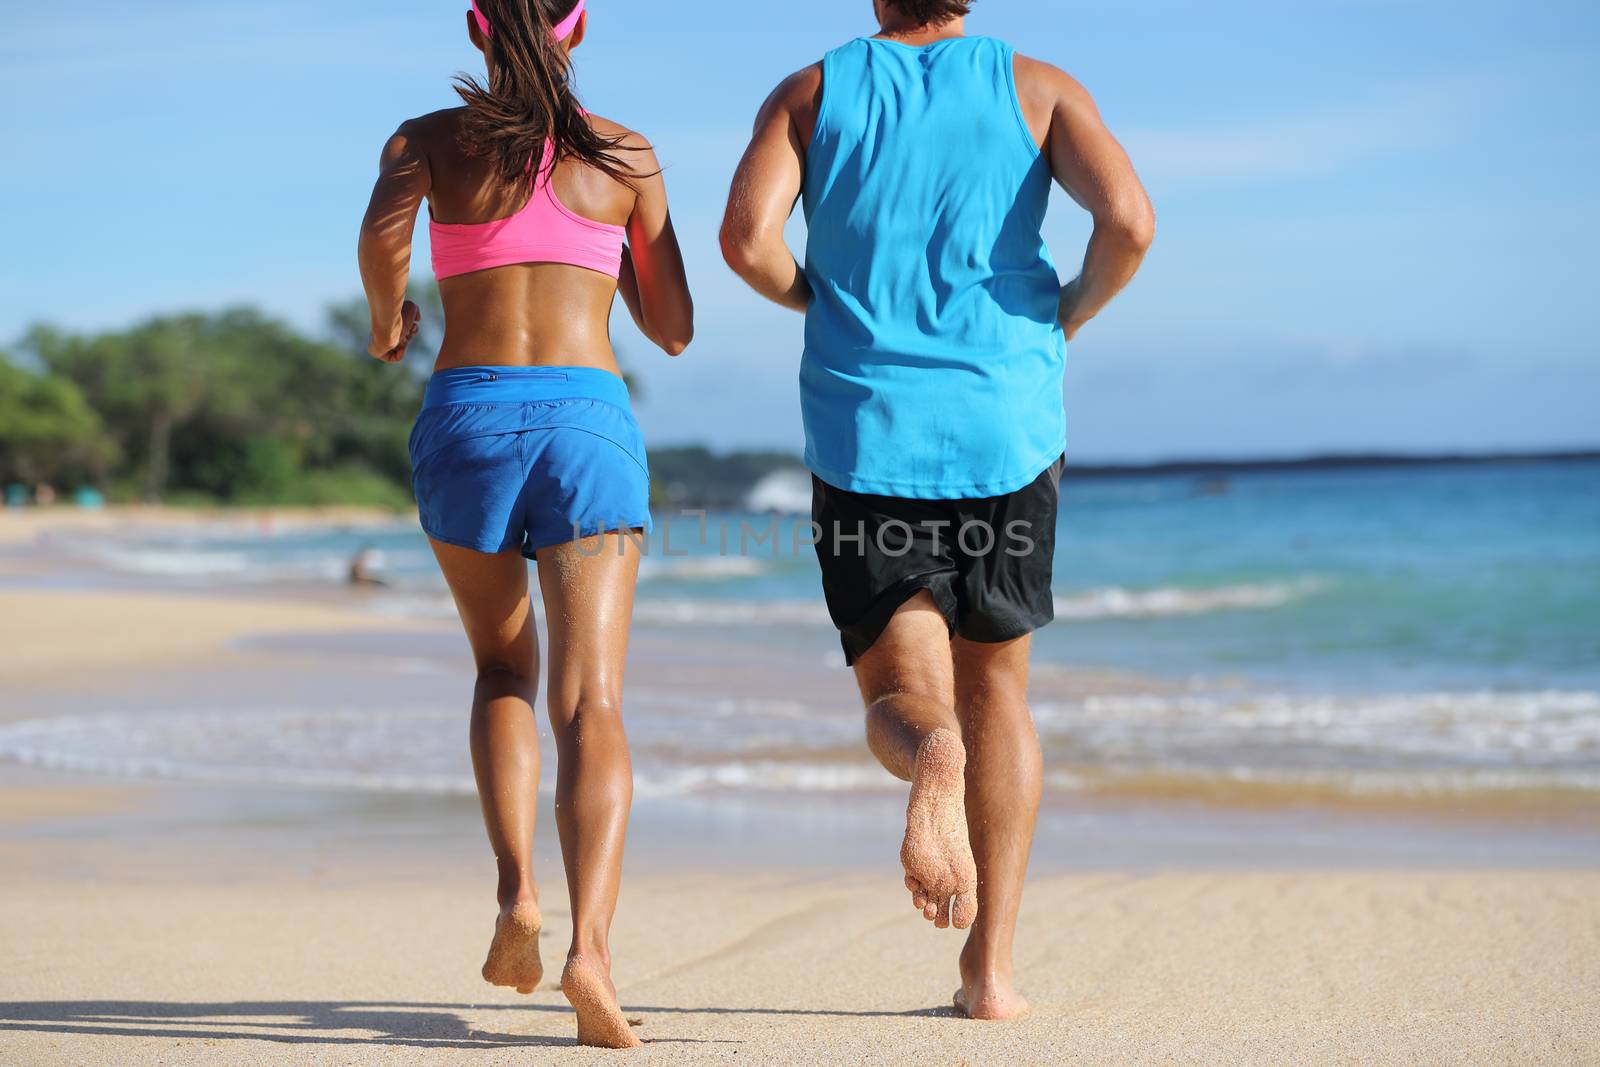 Two athletes runners couple running together on beach. People from behind jogging away barefoot on sand on tropical travel destination. Lower body, legs, feet.